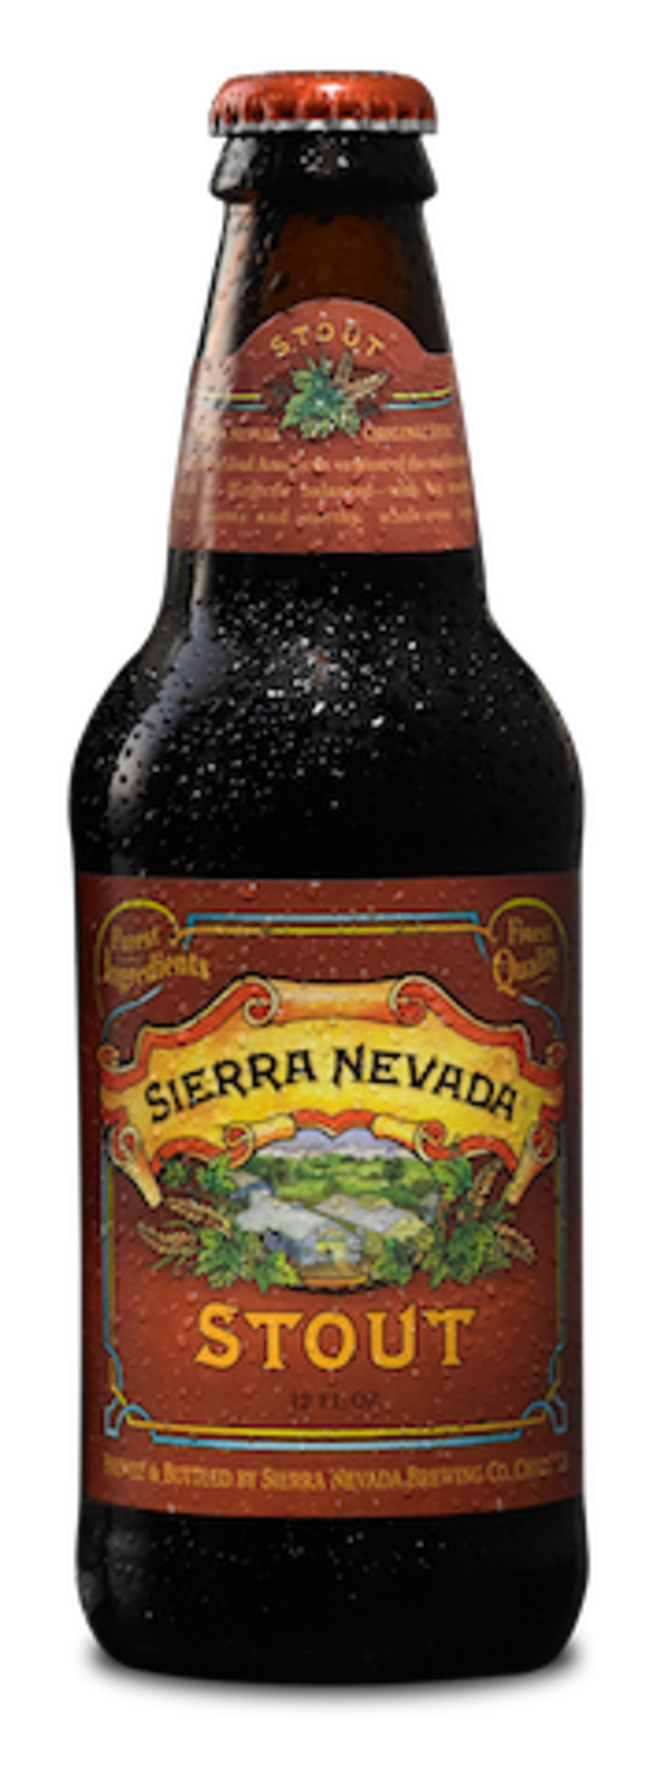 DARK SIDE: Sierra Nevada may be known for pale ales but don’t miss out on their stout this winter. - SIERRA NEVADA BREWING COMPANY